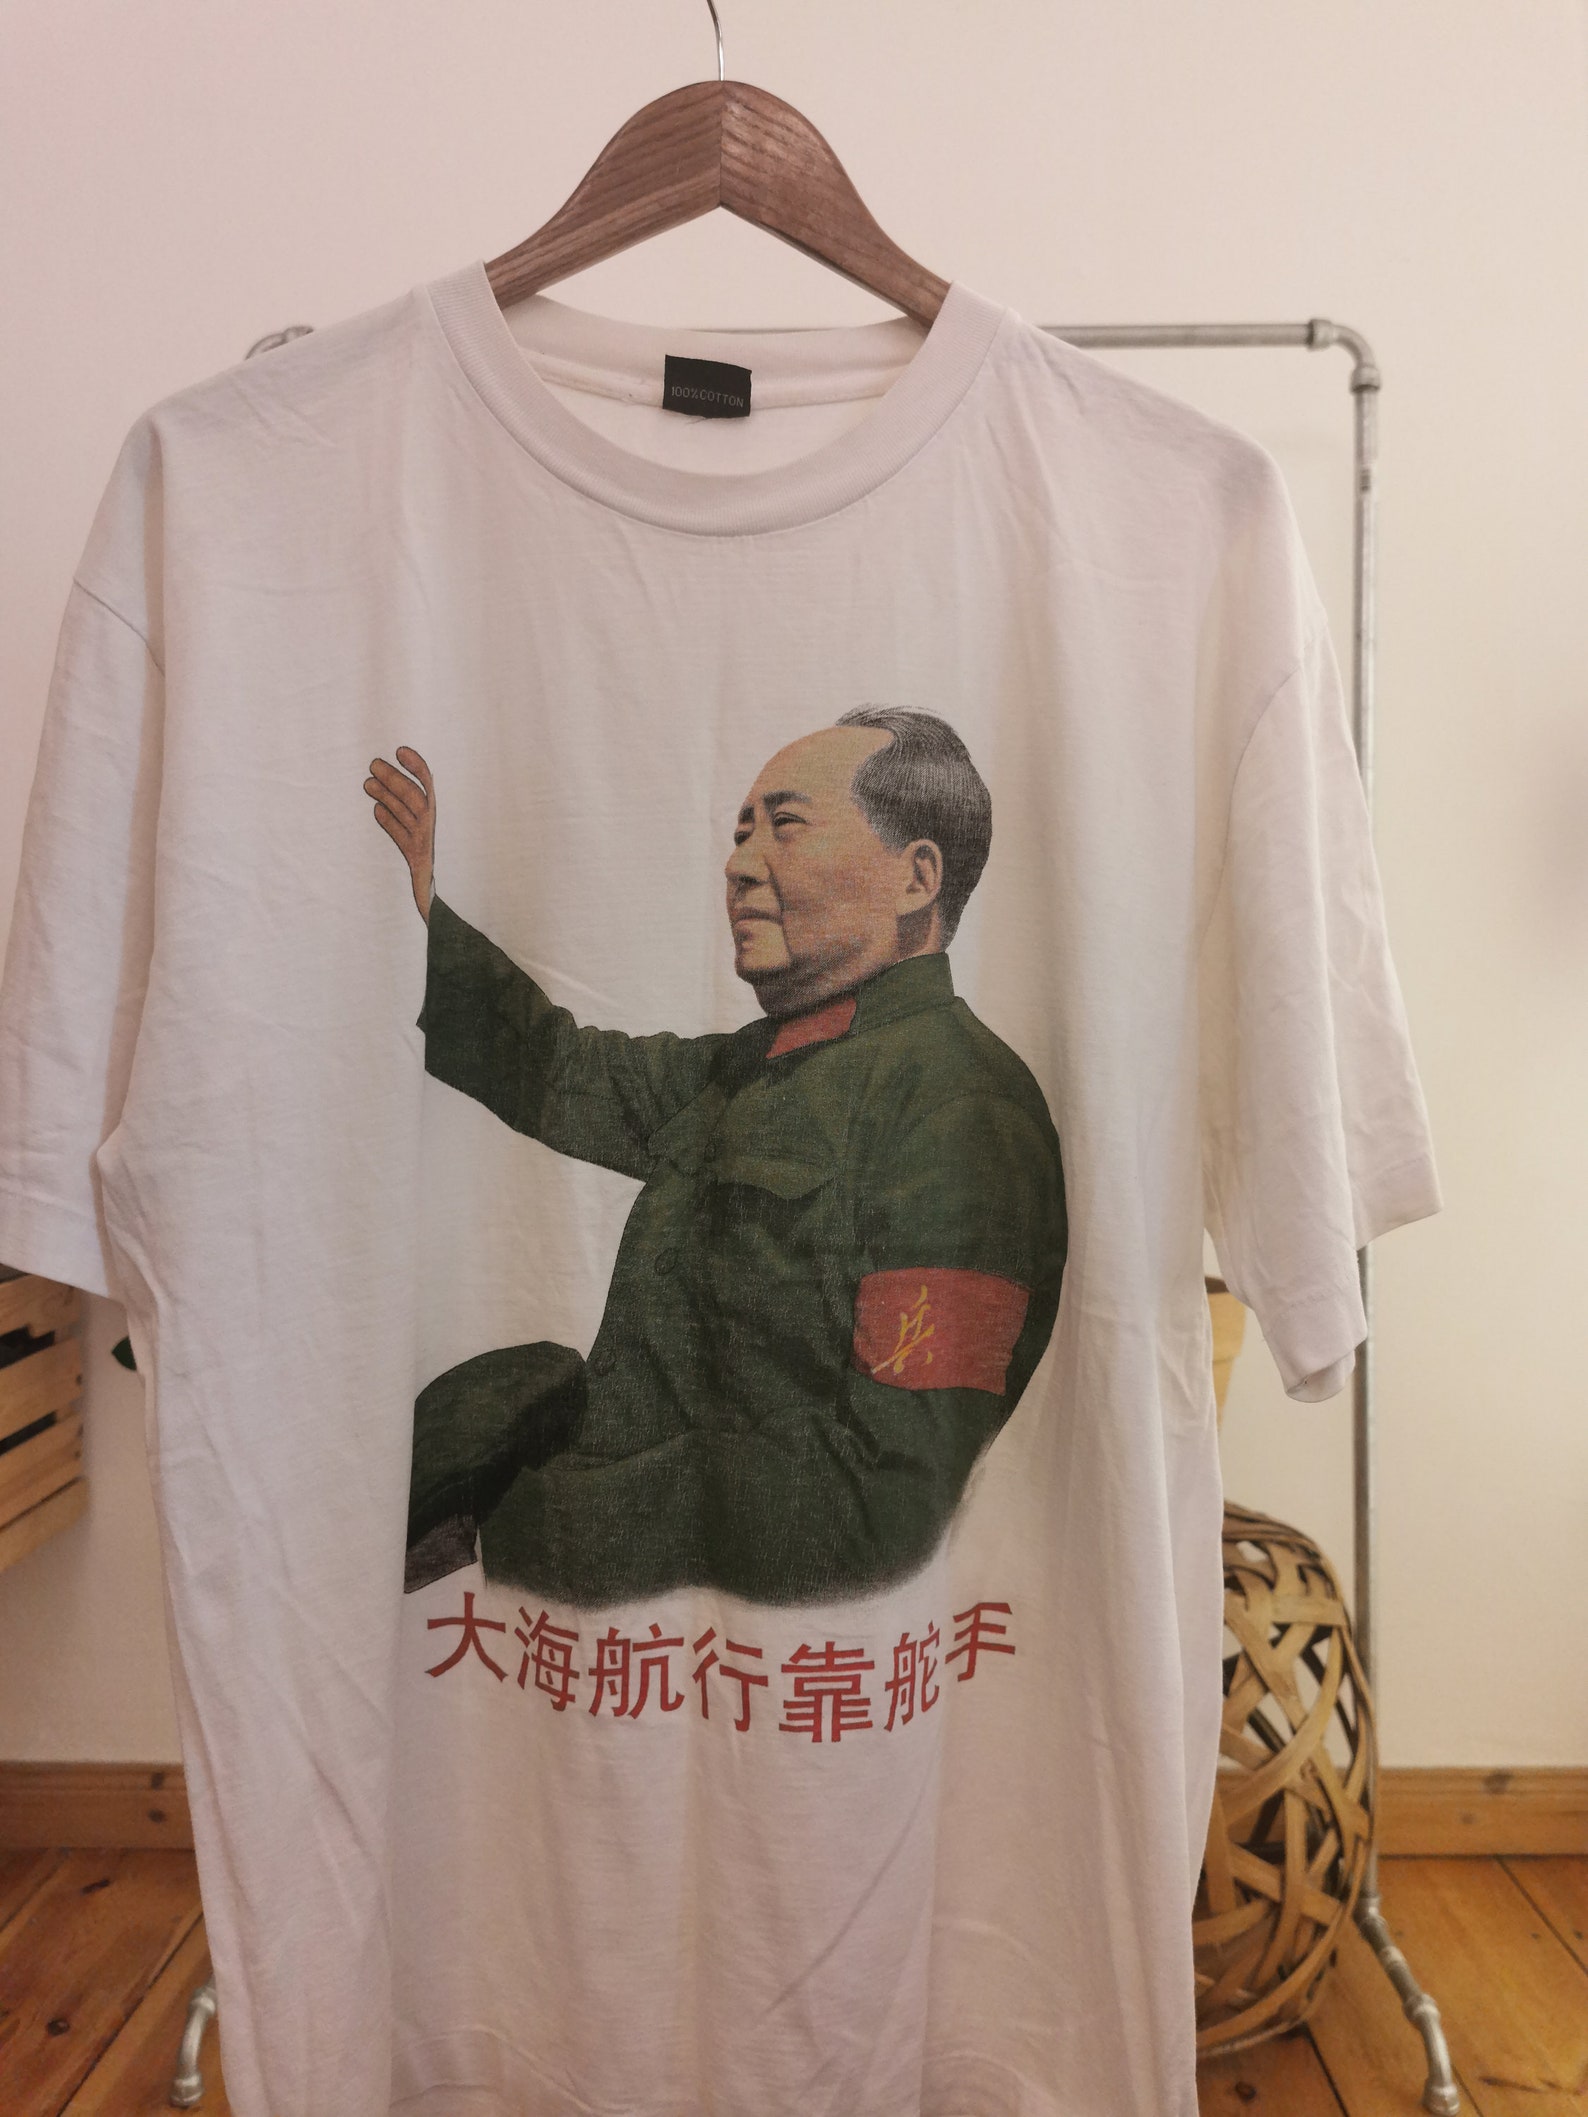 Mao Zedong Vintage T-shirt XL Size/ Chinese cultural | Etsy